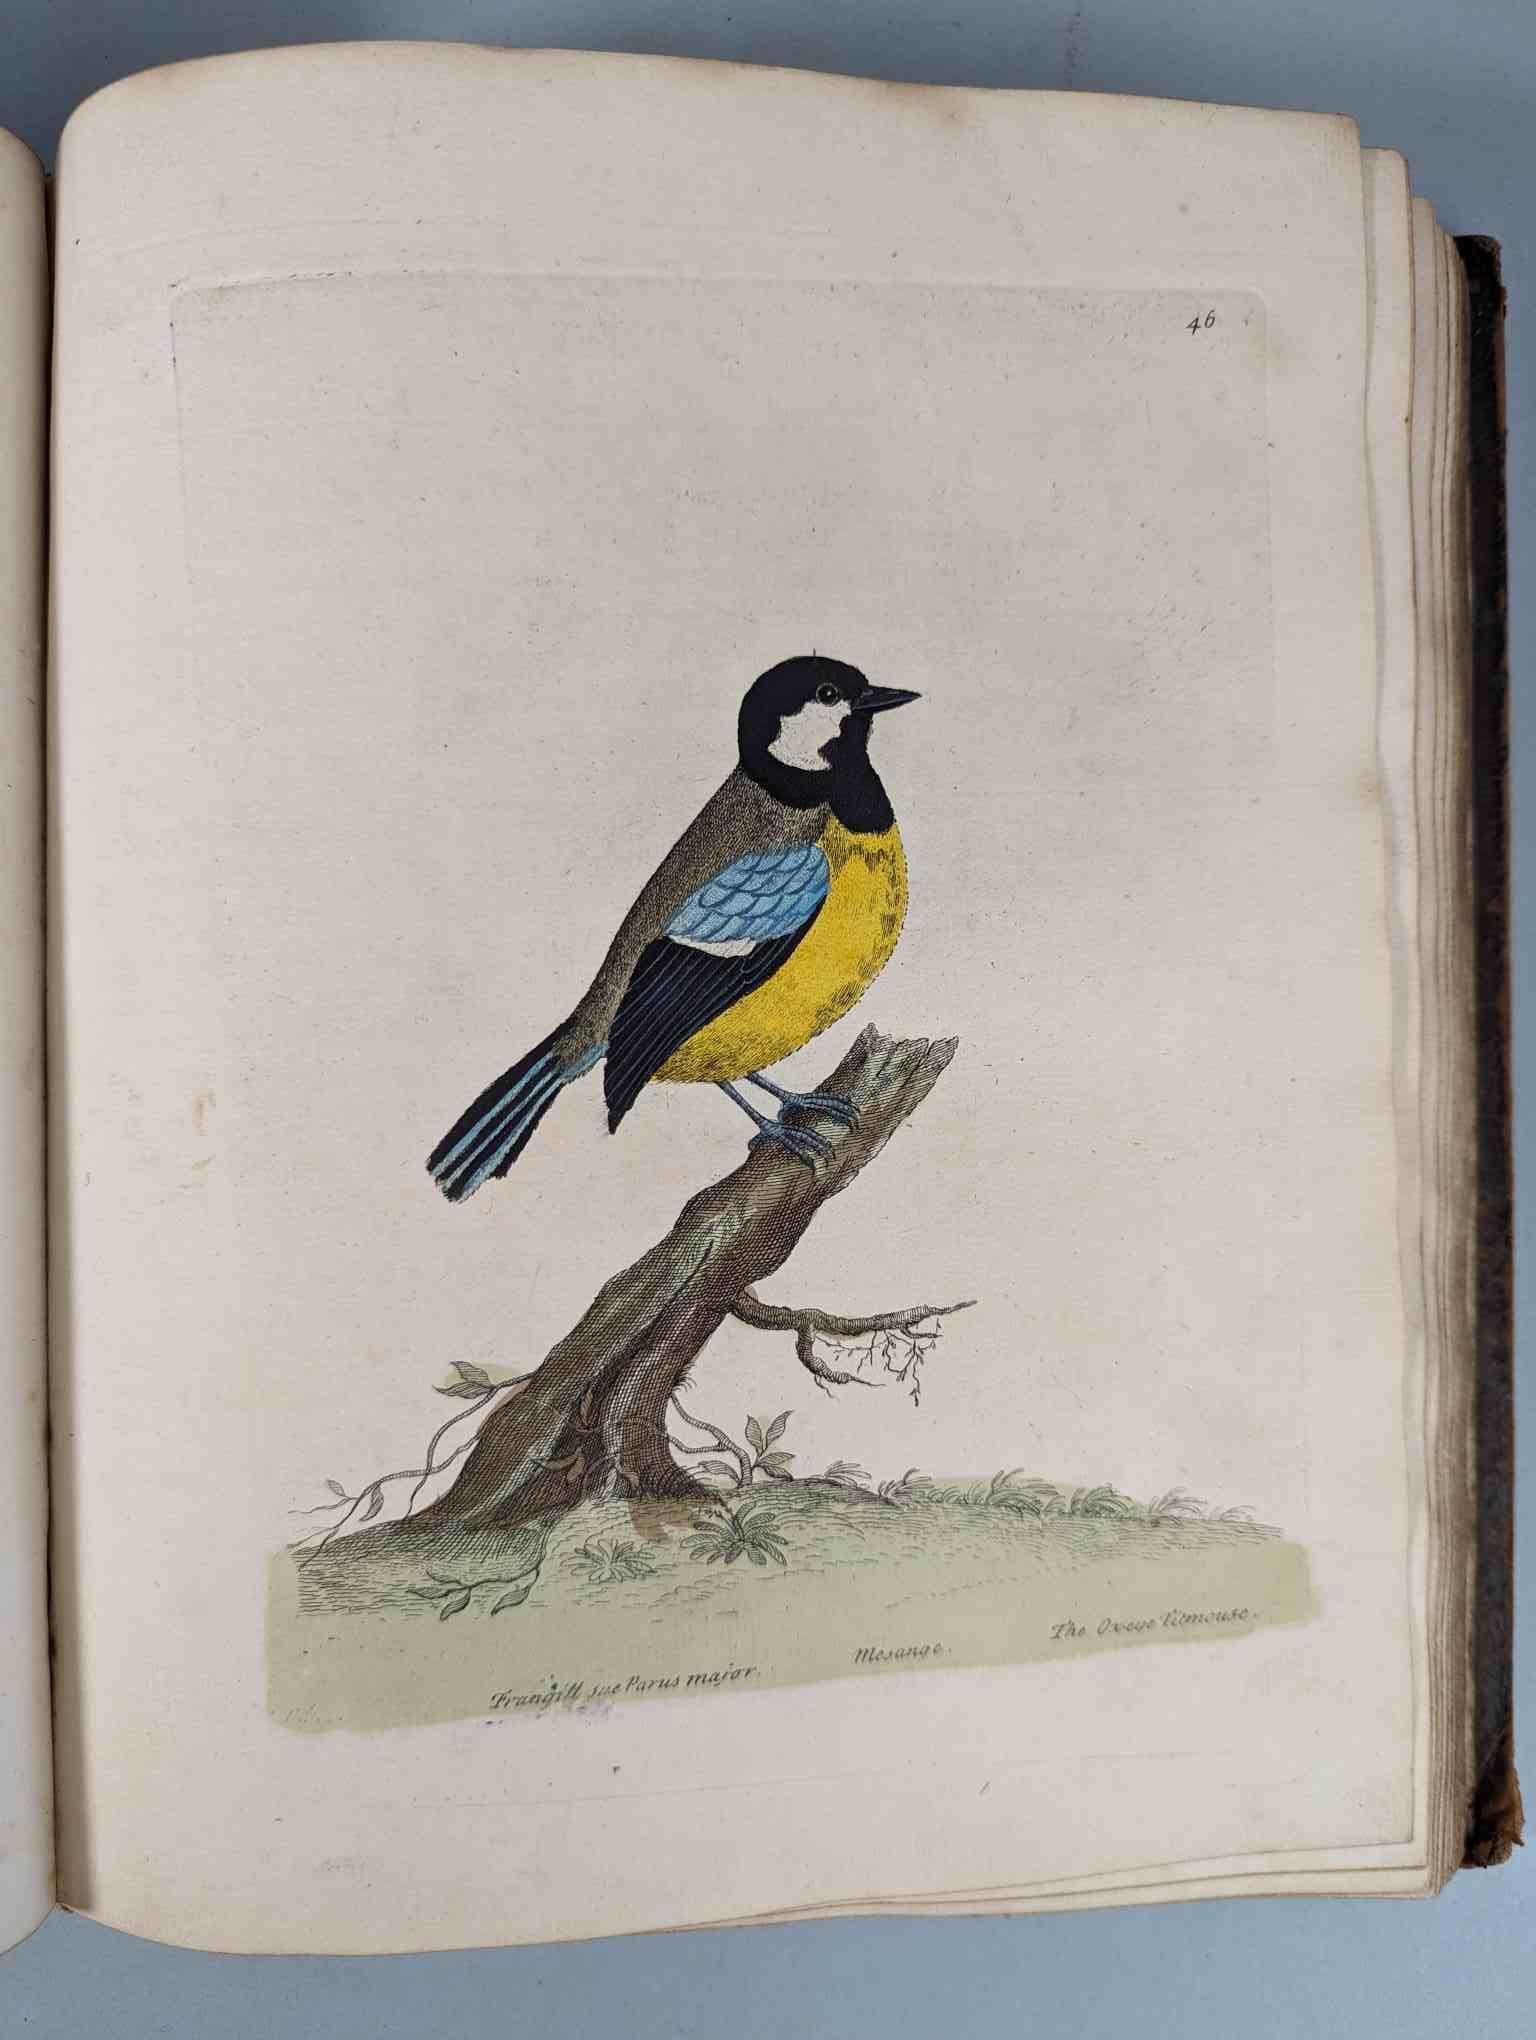 ALBIN, Eleazar. A Natural History of Birds, to which are added, Notes and Observations by W. - Image 49 of 208